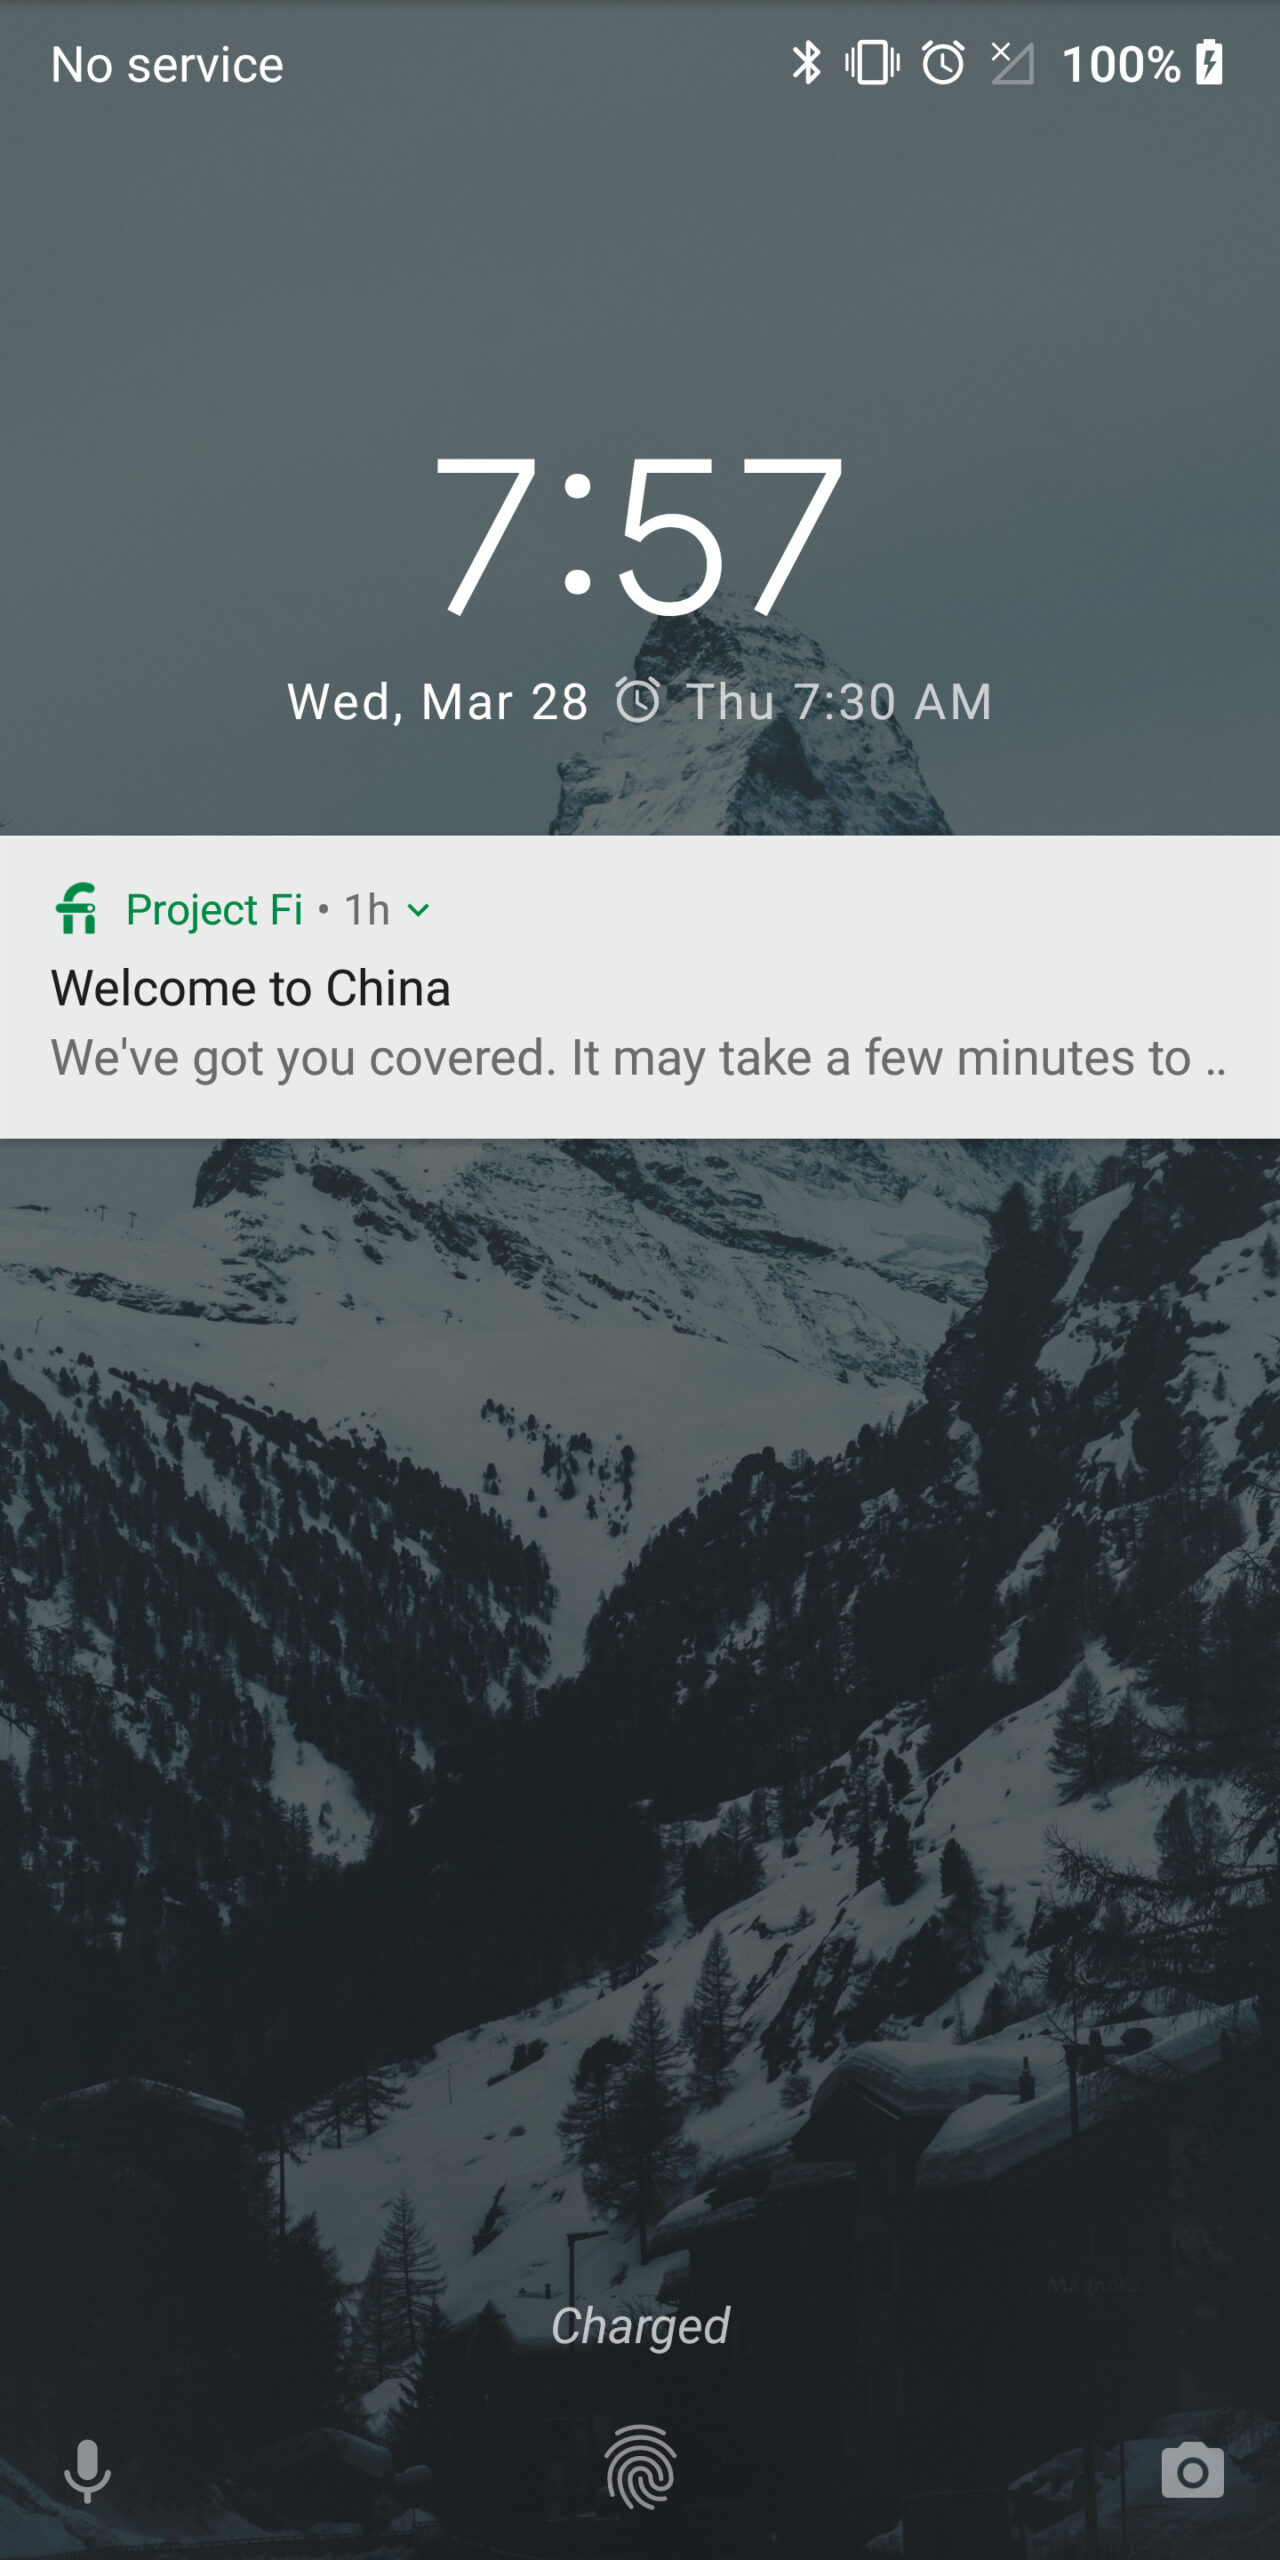 Project Fi in China